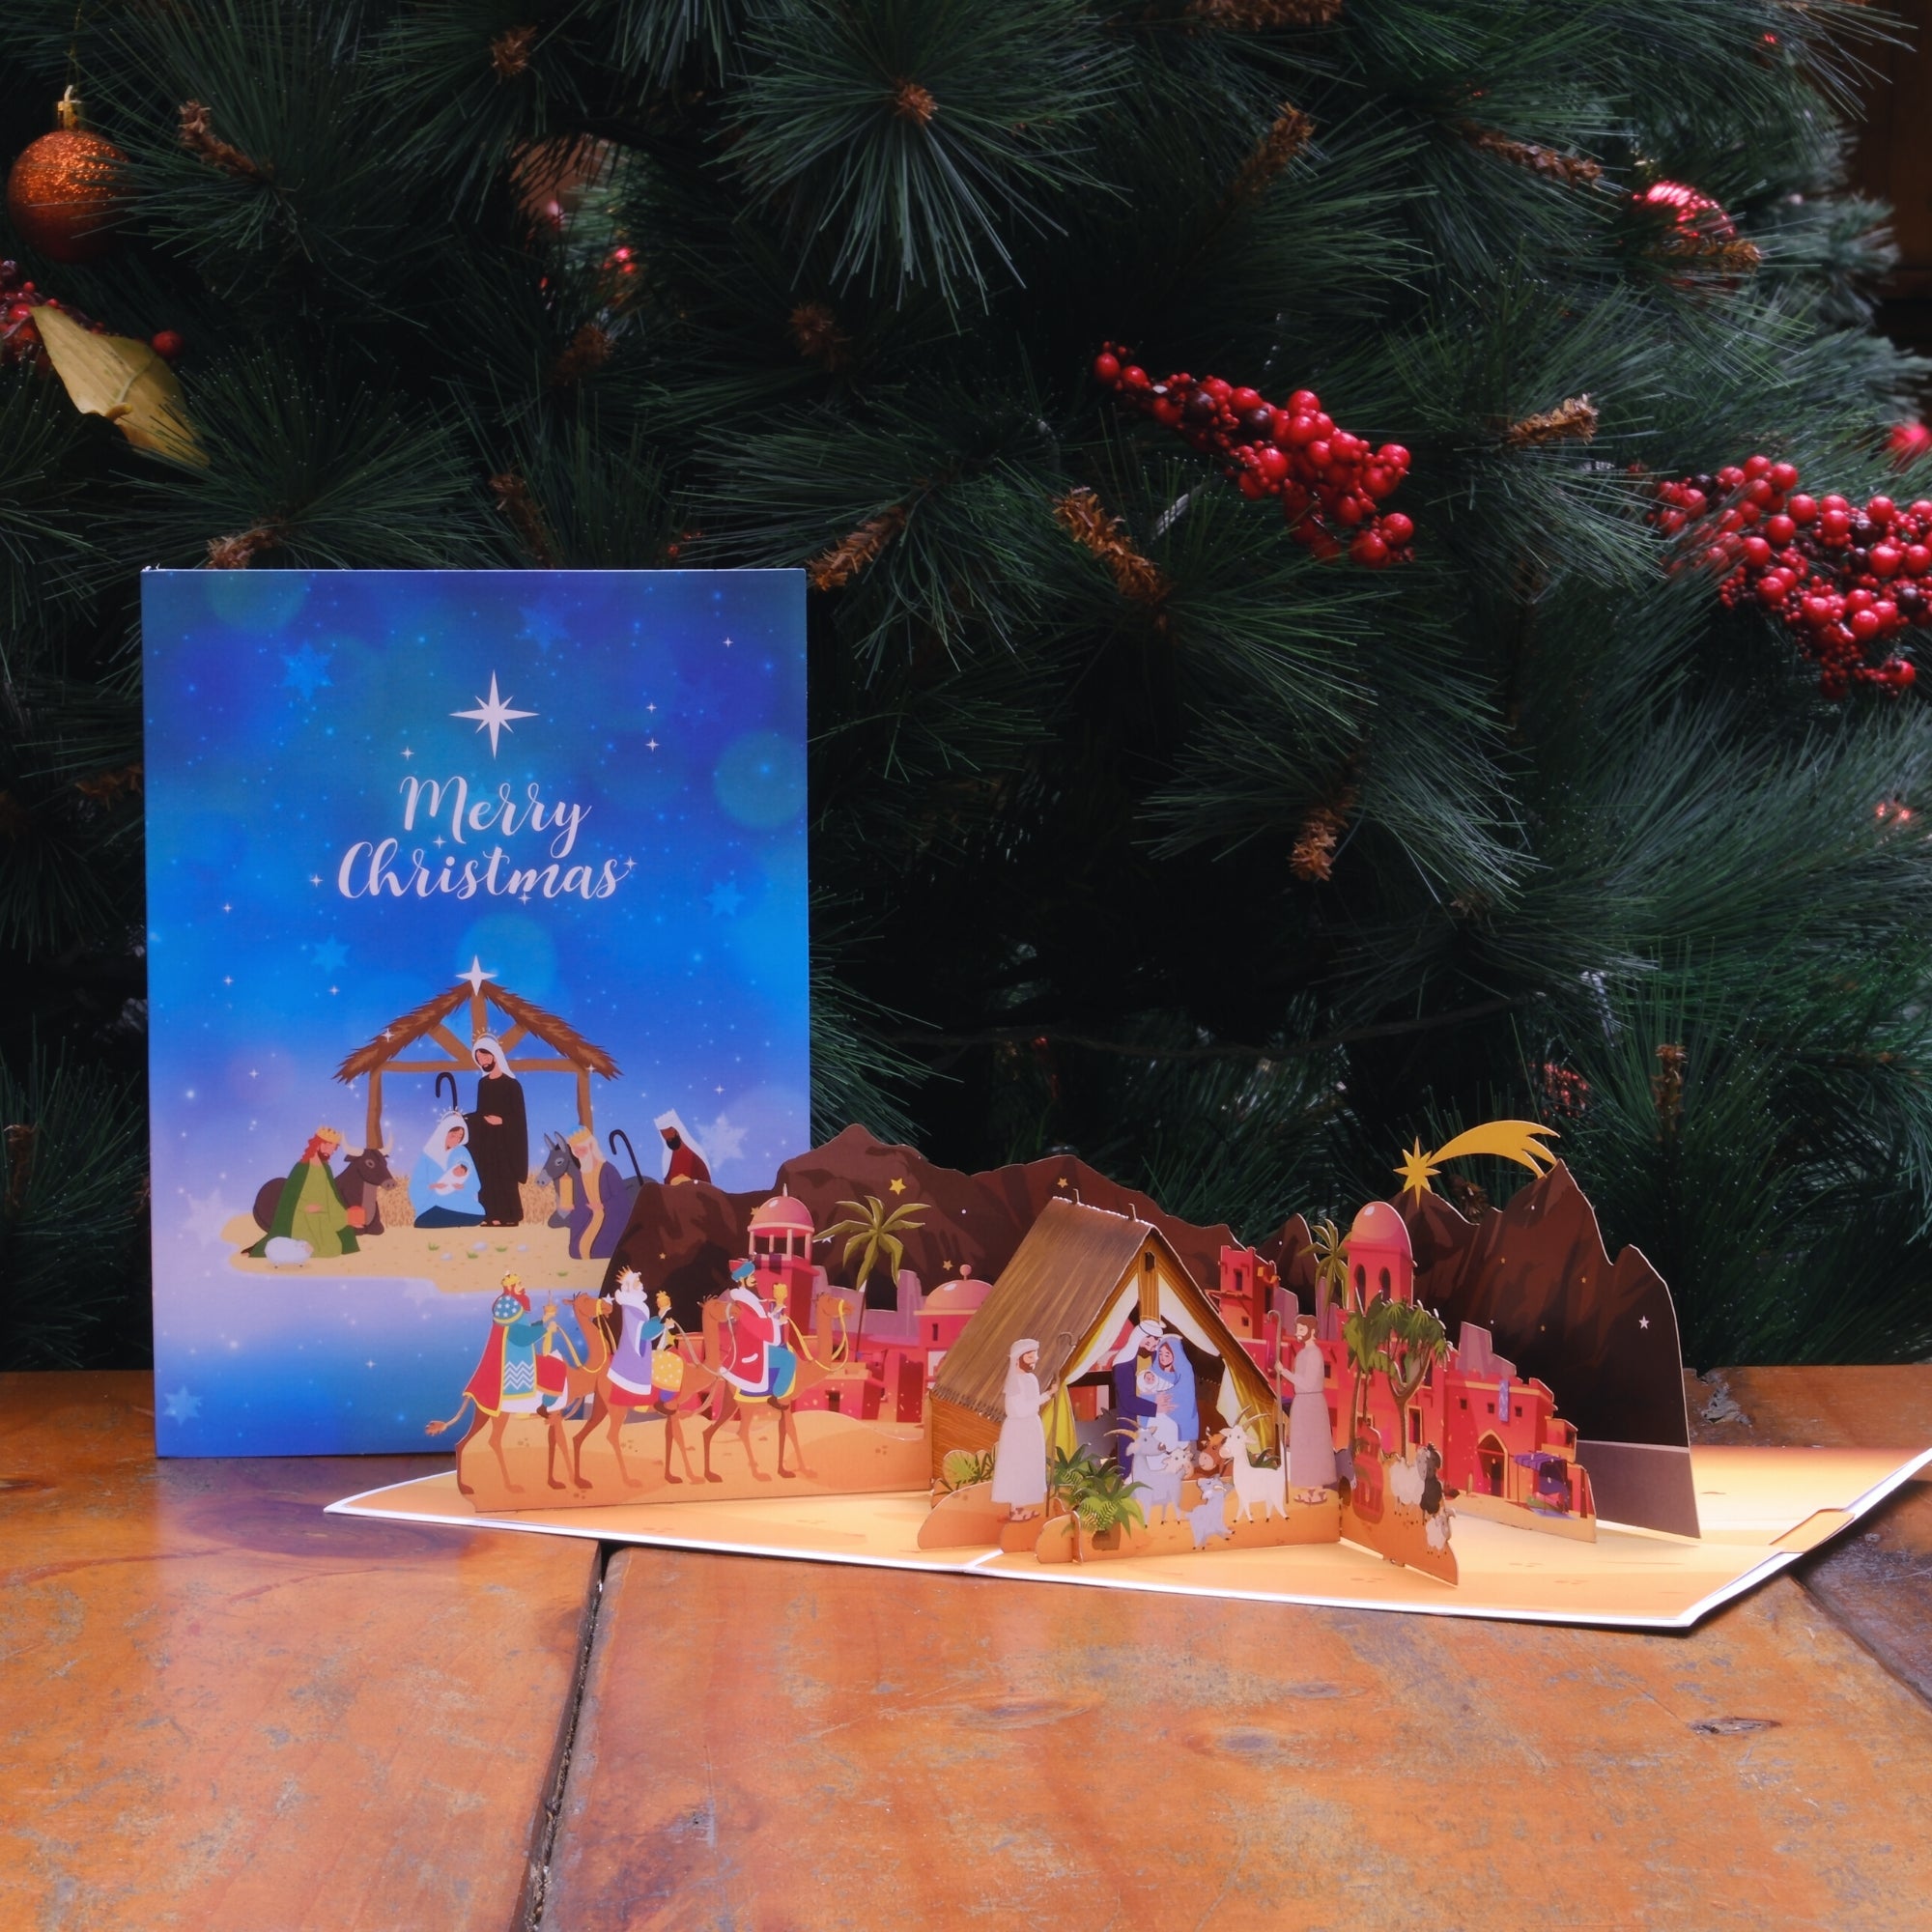 Pop Up Greeting Card Merry Christmas Jesus Christ's birth Holy Night Nativity Scene Decoration Christmas Gift Idea Holiday Card For Family